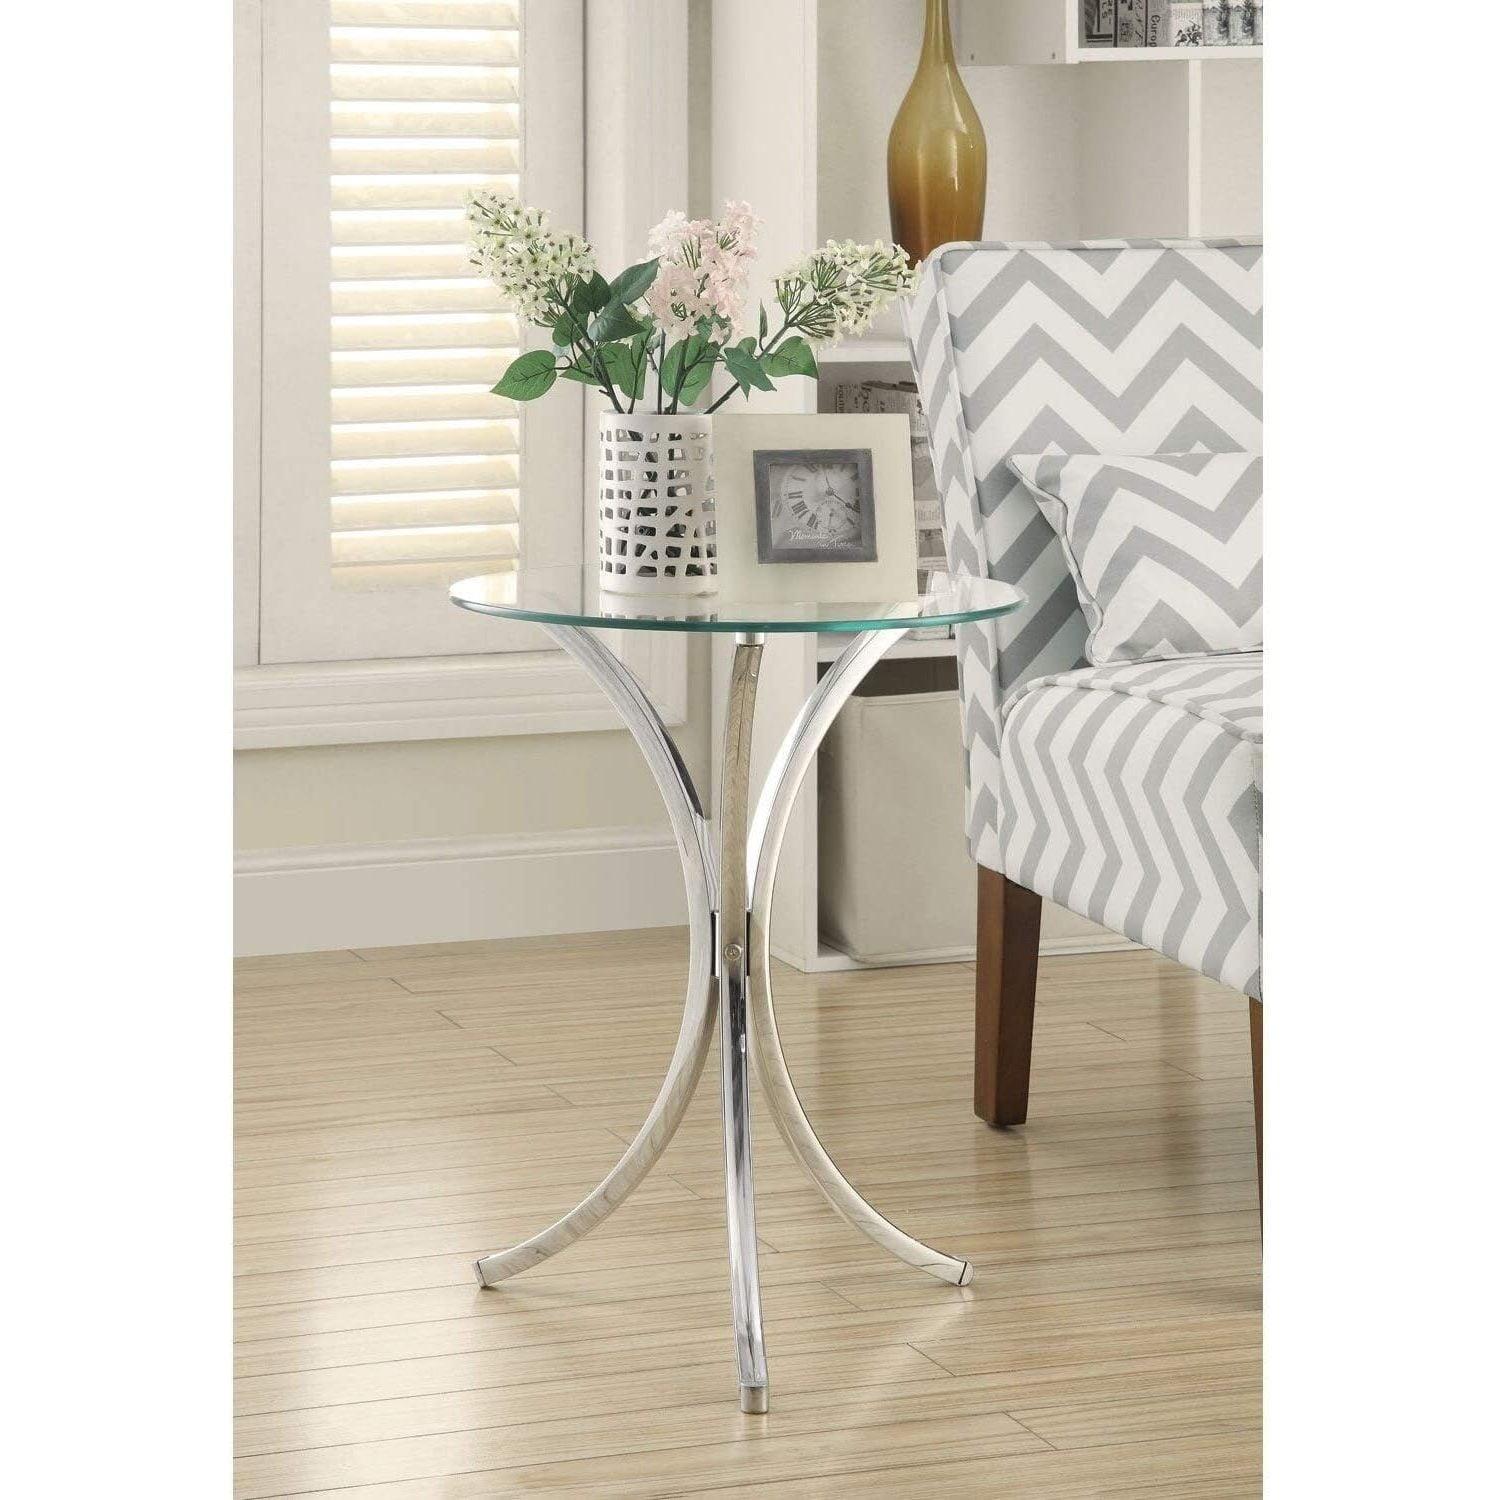 Eloise 18" Chrome Round Metal Accent Table with Curved Legs and Glass Top